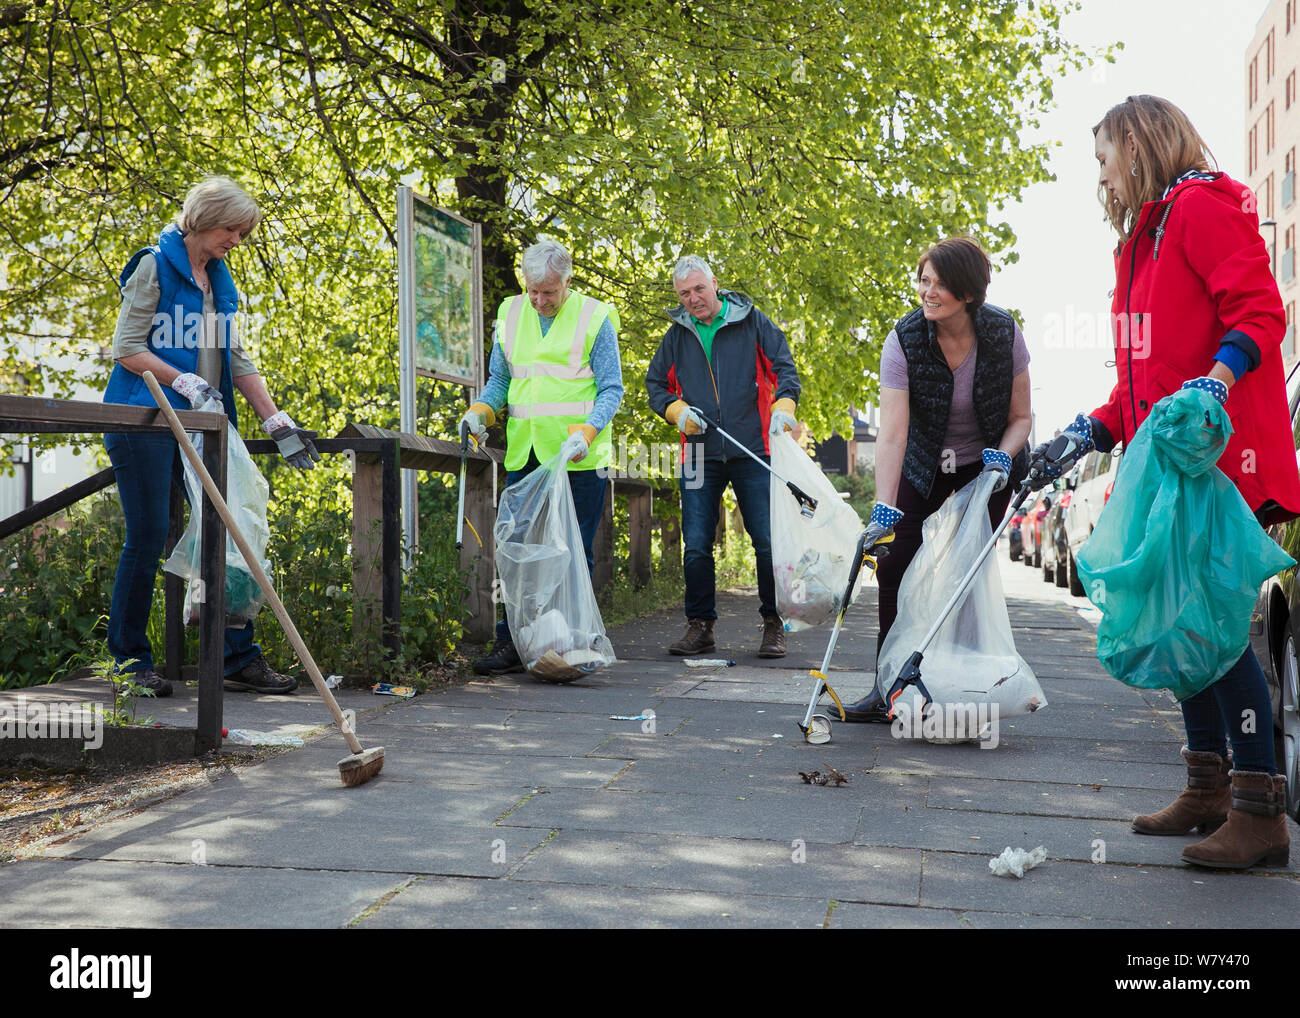 A group of five people participating in a city clean-up together. Stock Photo